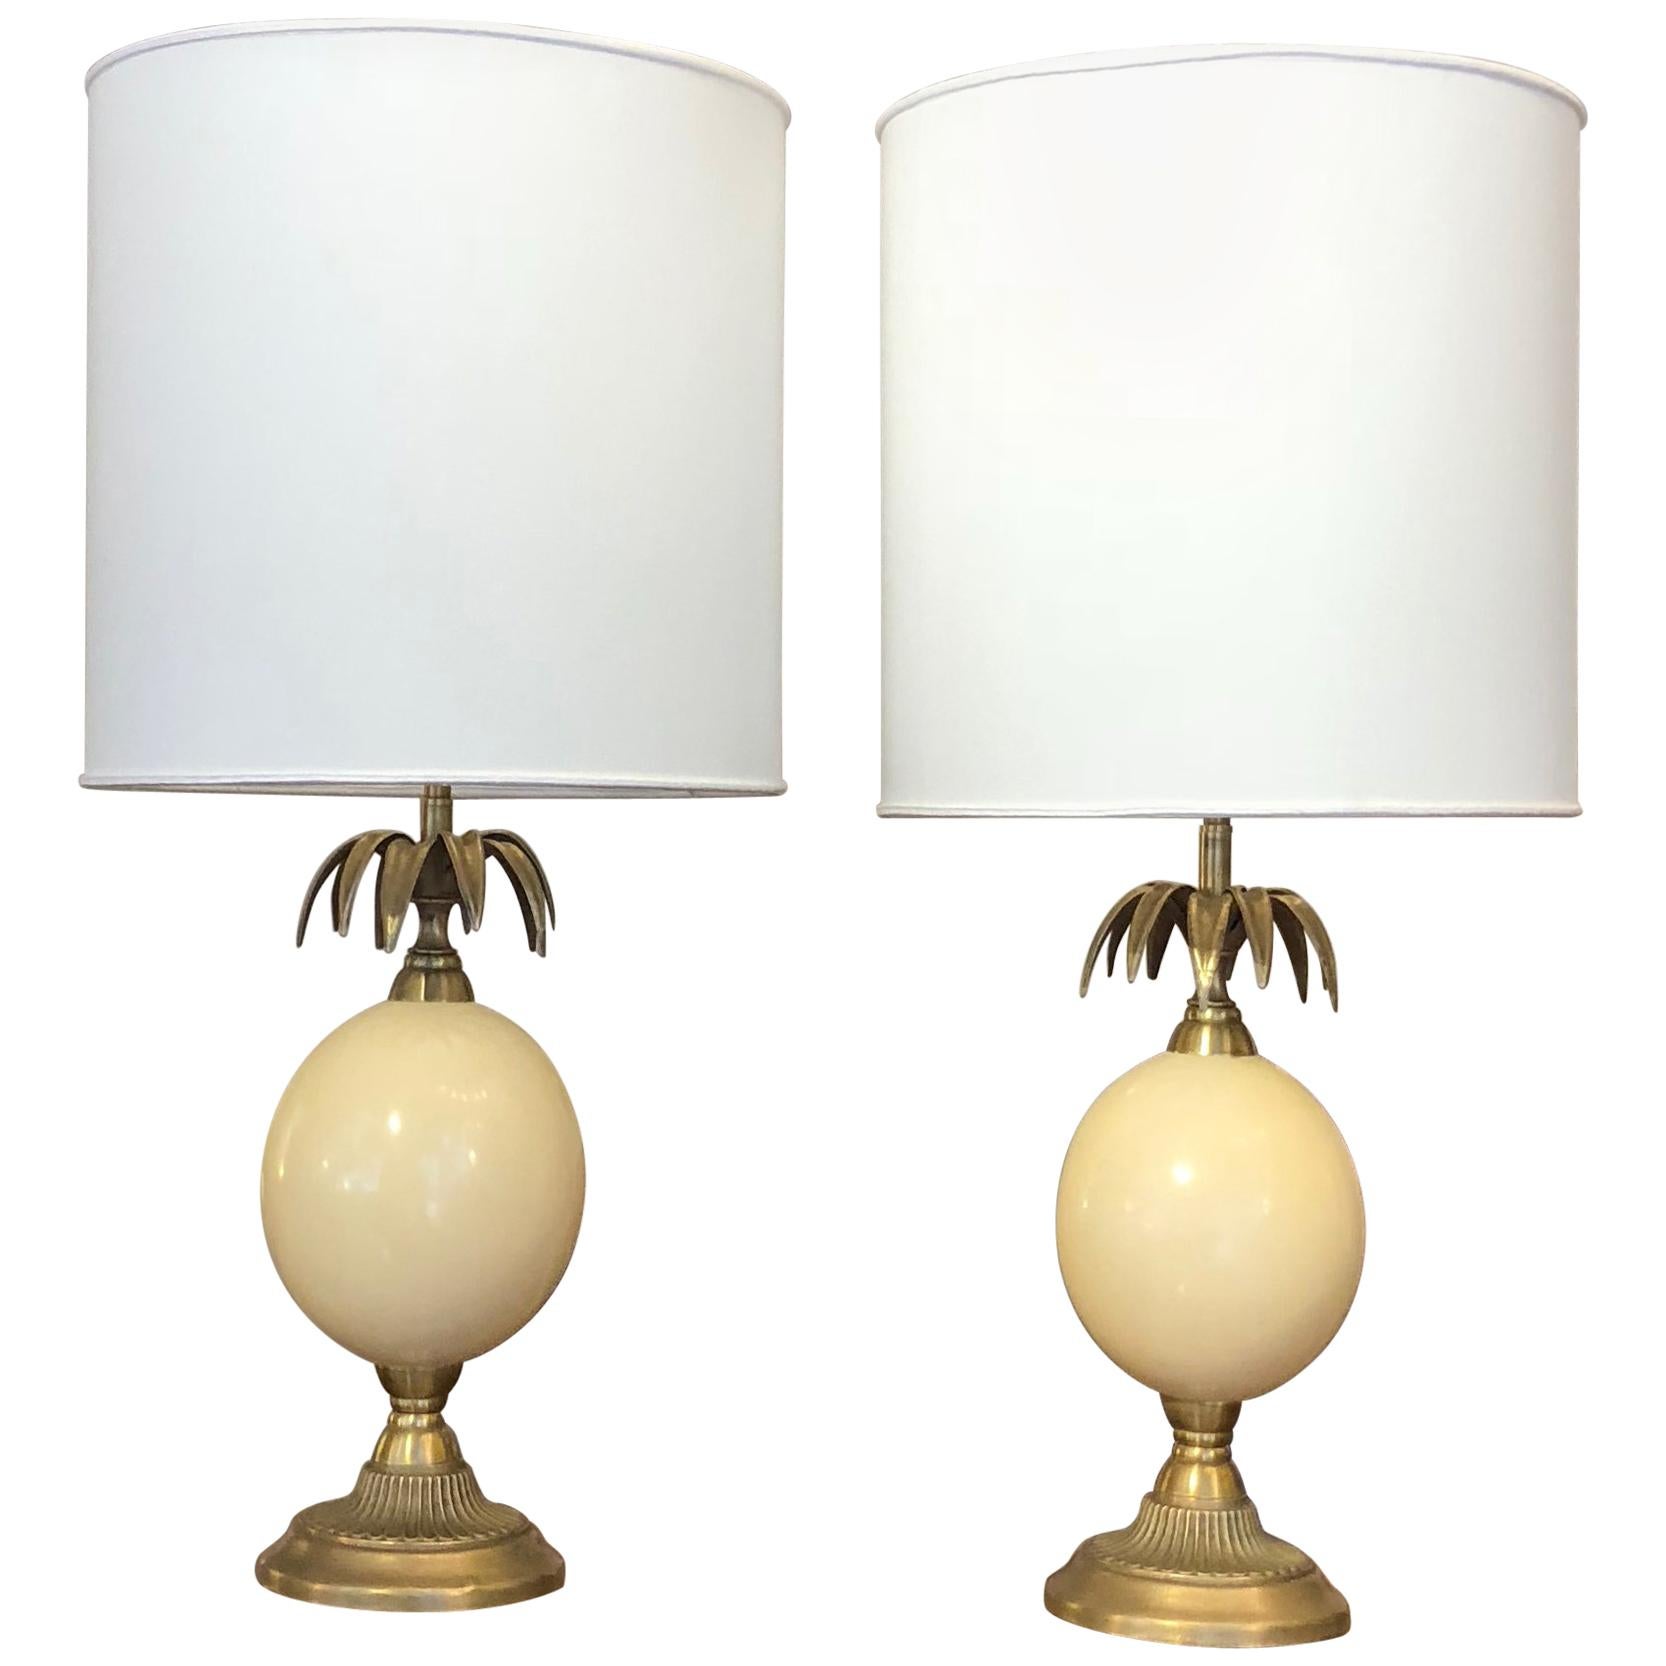 Cream and gold Brass Pineapple Shape Table Lamps, 1960s, France